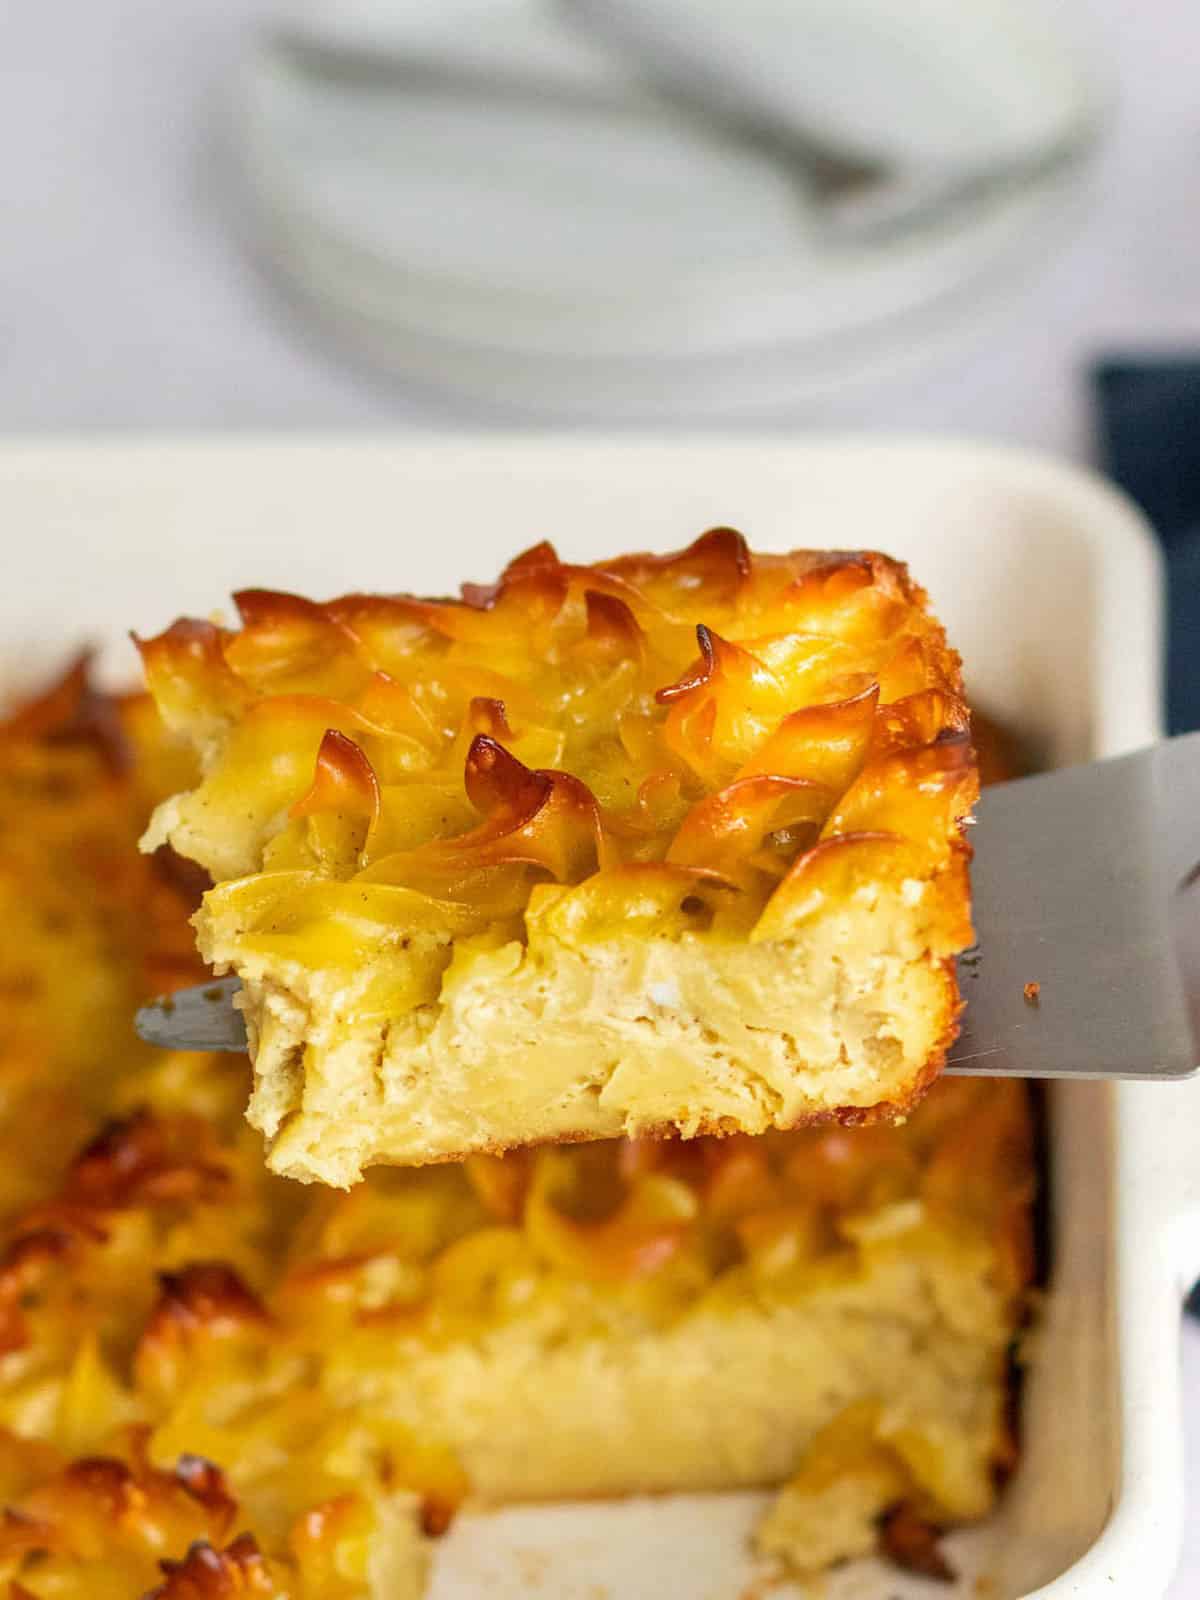 A noodle kugel serving on a spatula with the remaining casserole in the background.